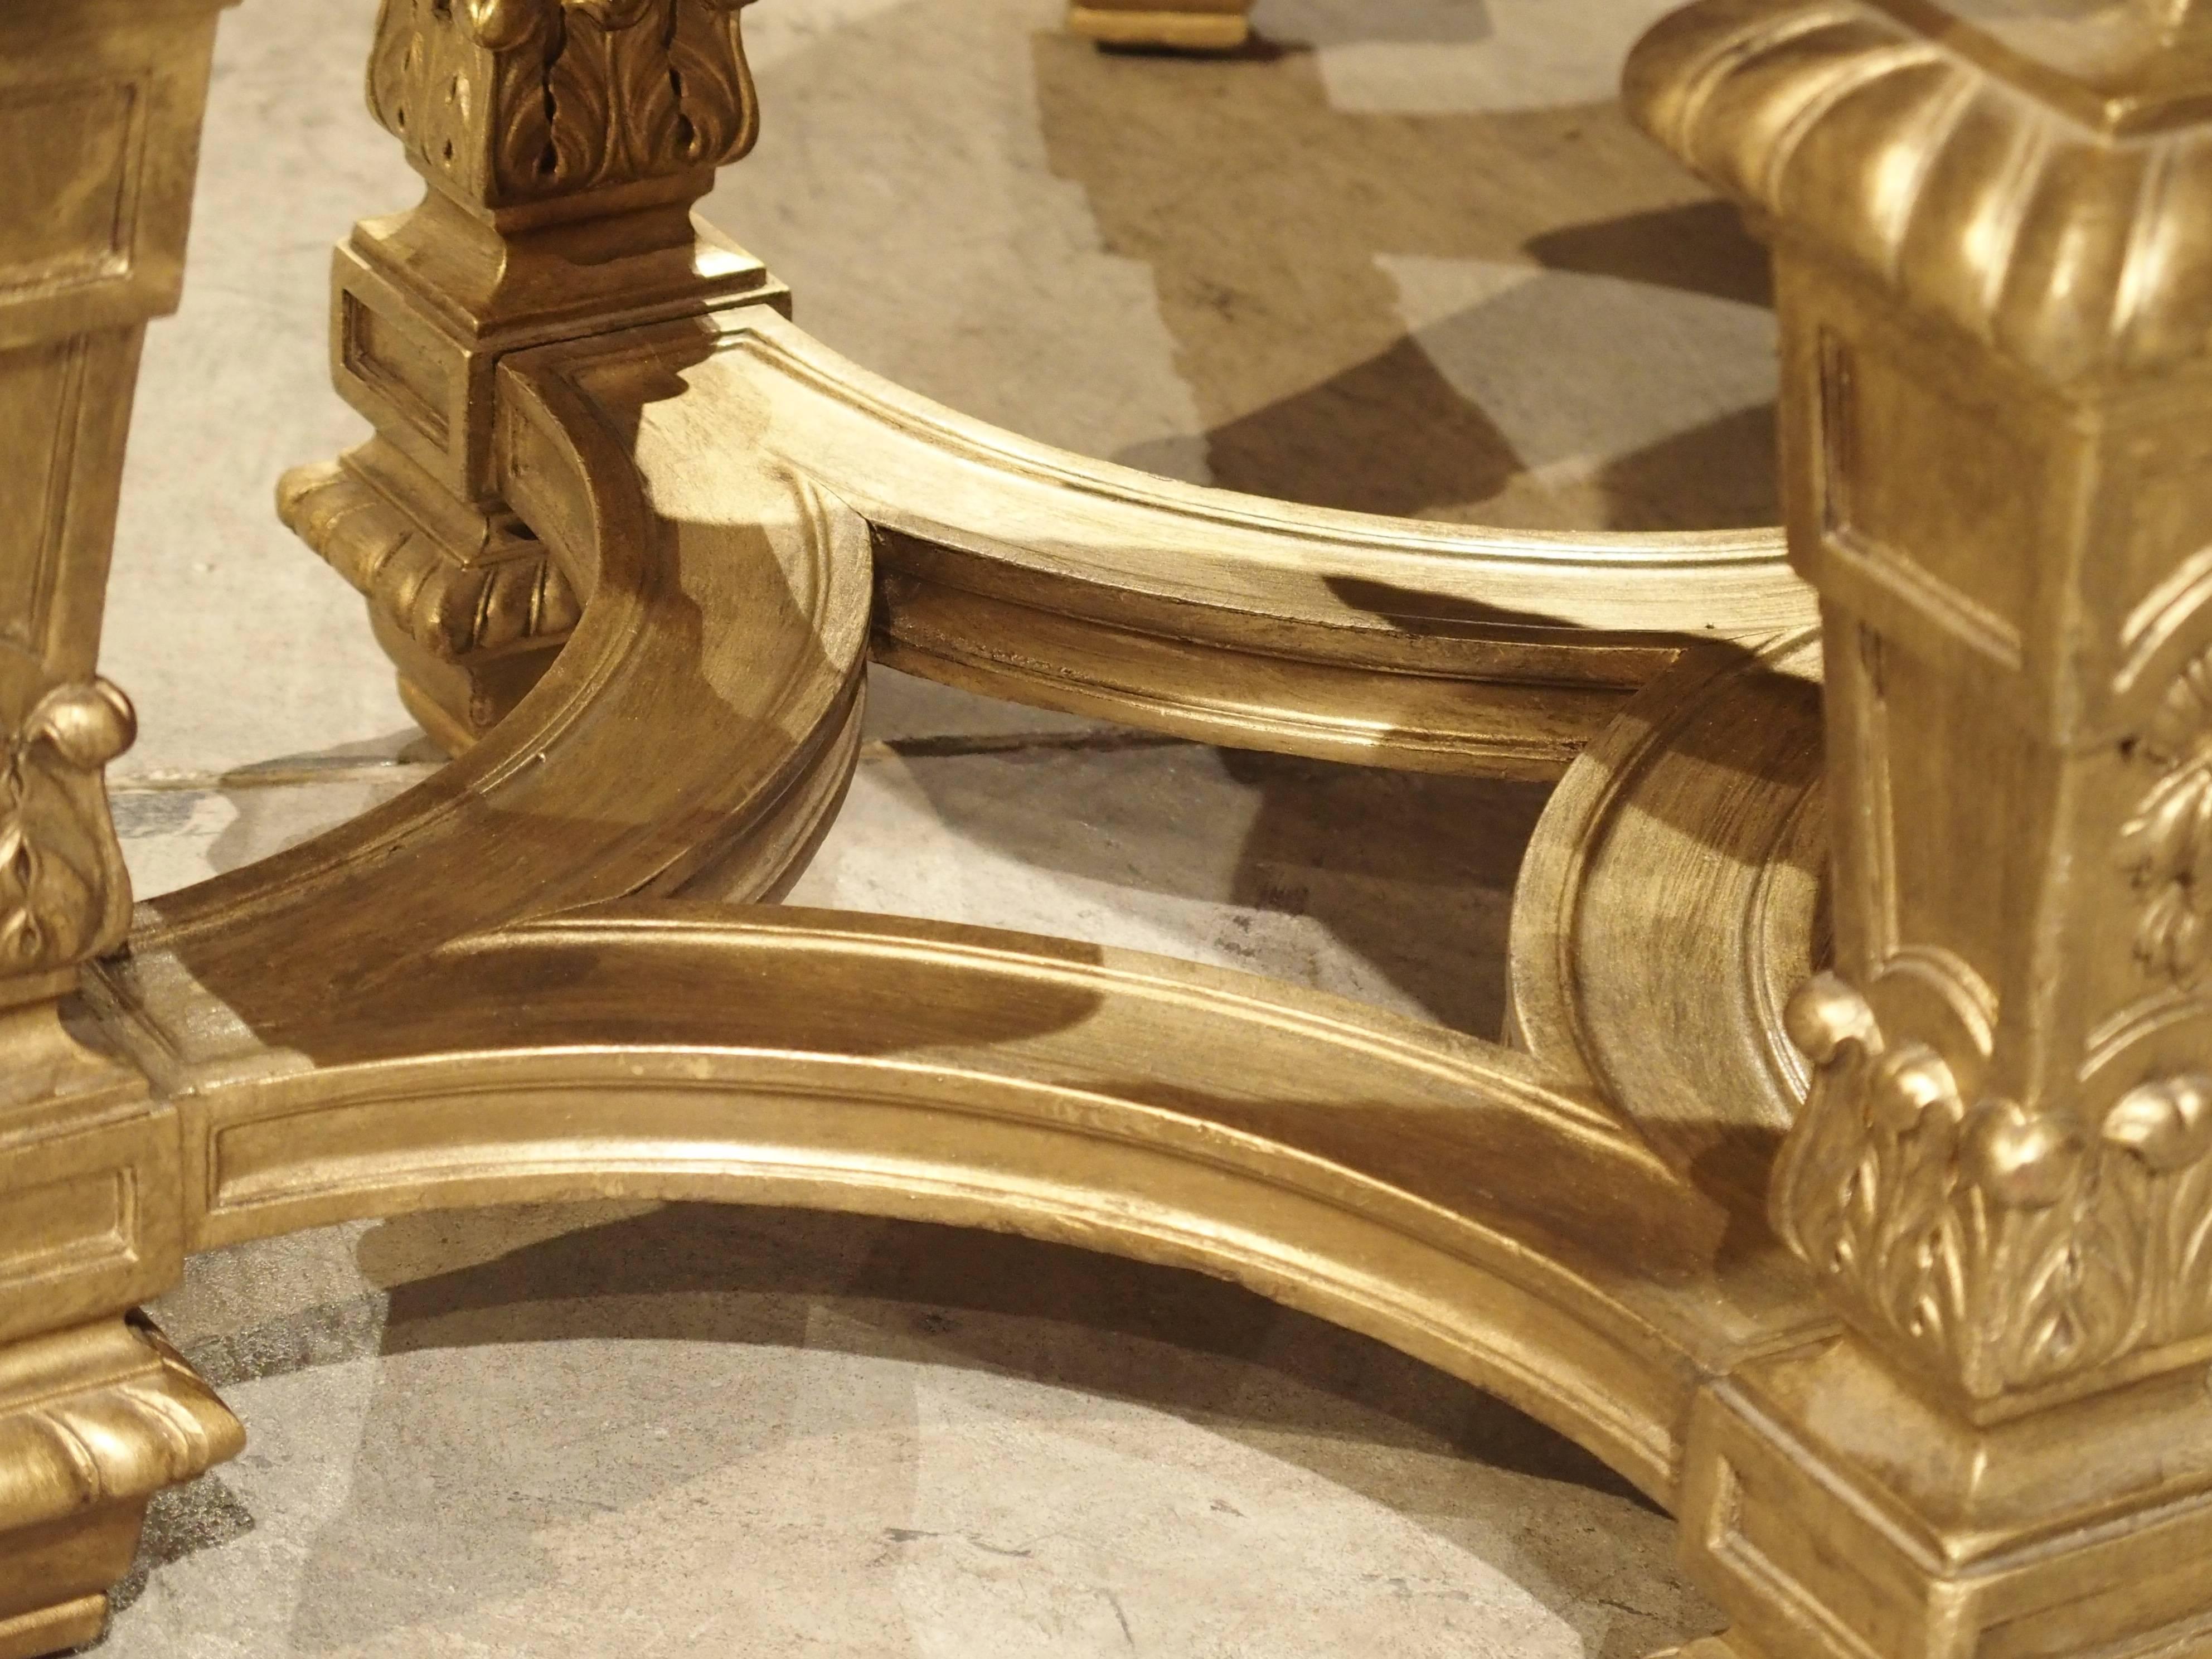 These beautiful early 20th century French giltwood and marble side tables feature Louis XIV motifs. The light cream colored marble has subtle veining which blends nicely with the giltwood décor. The Louis XIV square baluster legs have rectangular